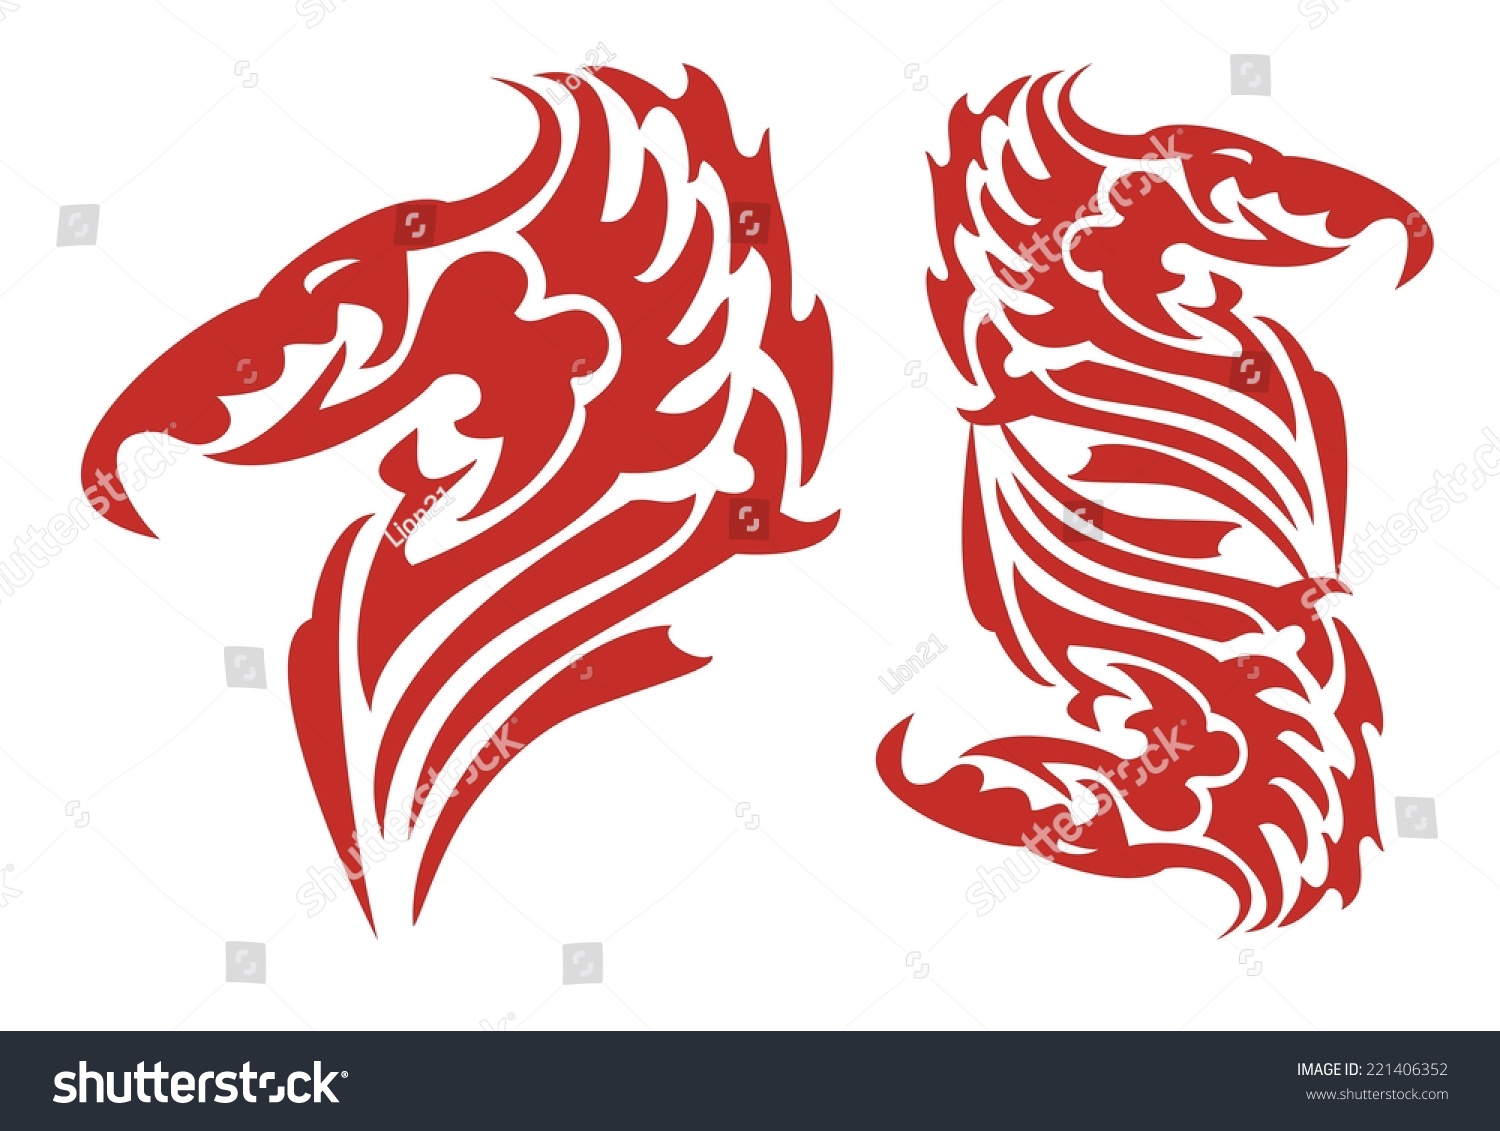 Tribal Flaming Dragon Head Fire Form Stock Vector Royalty Free 221406352 0434